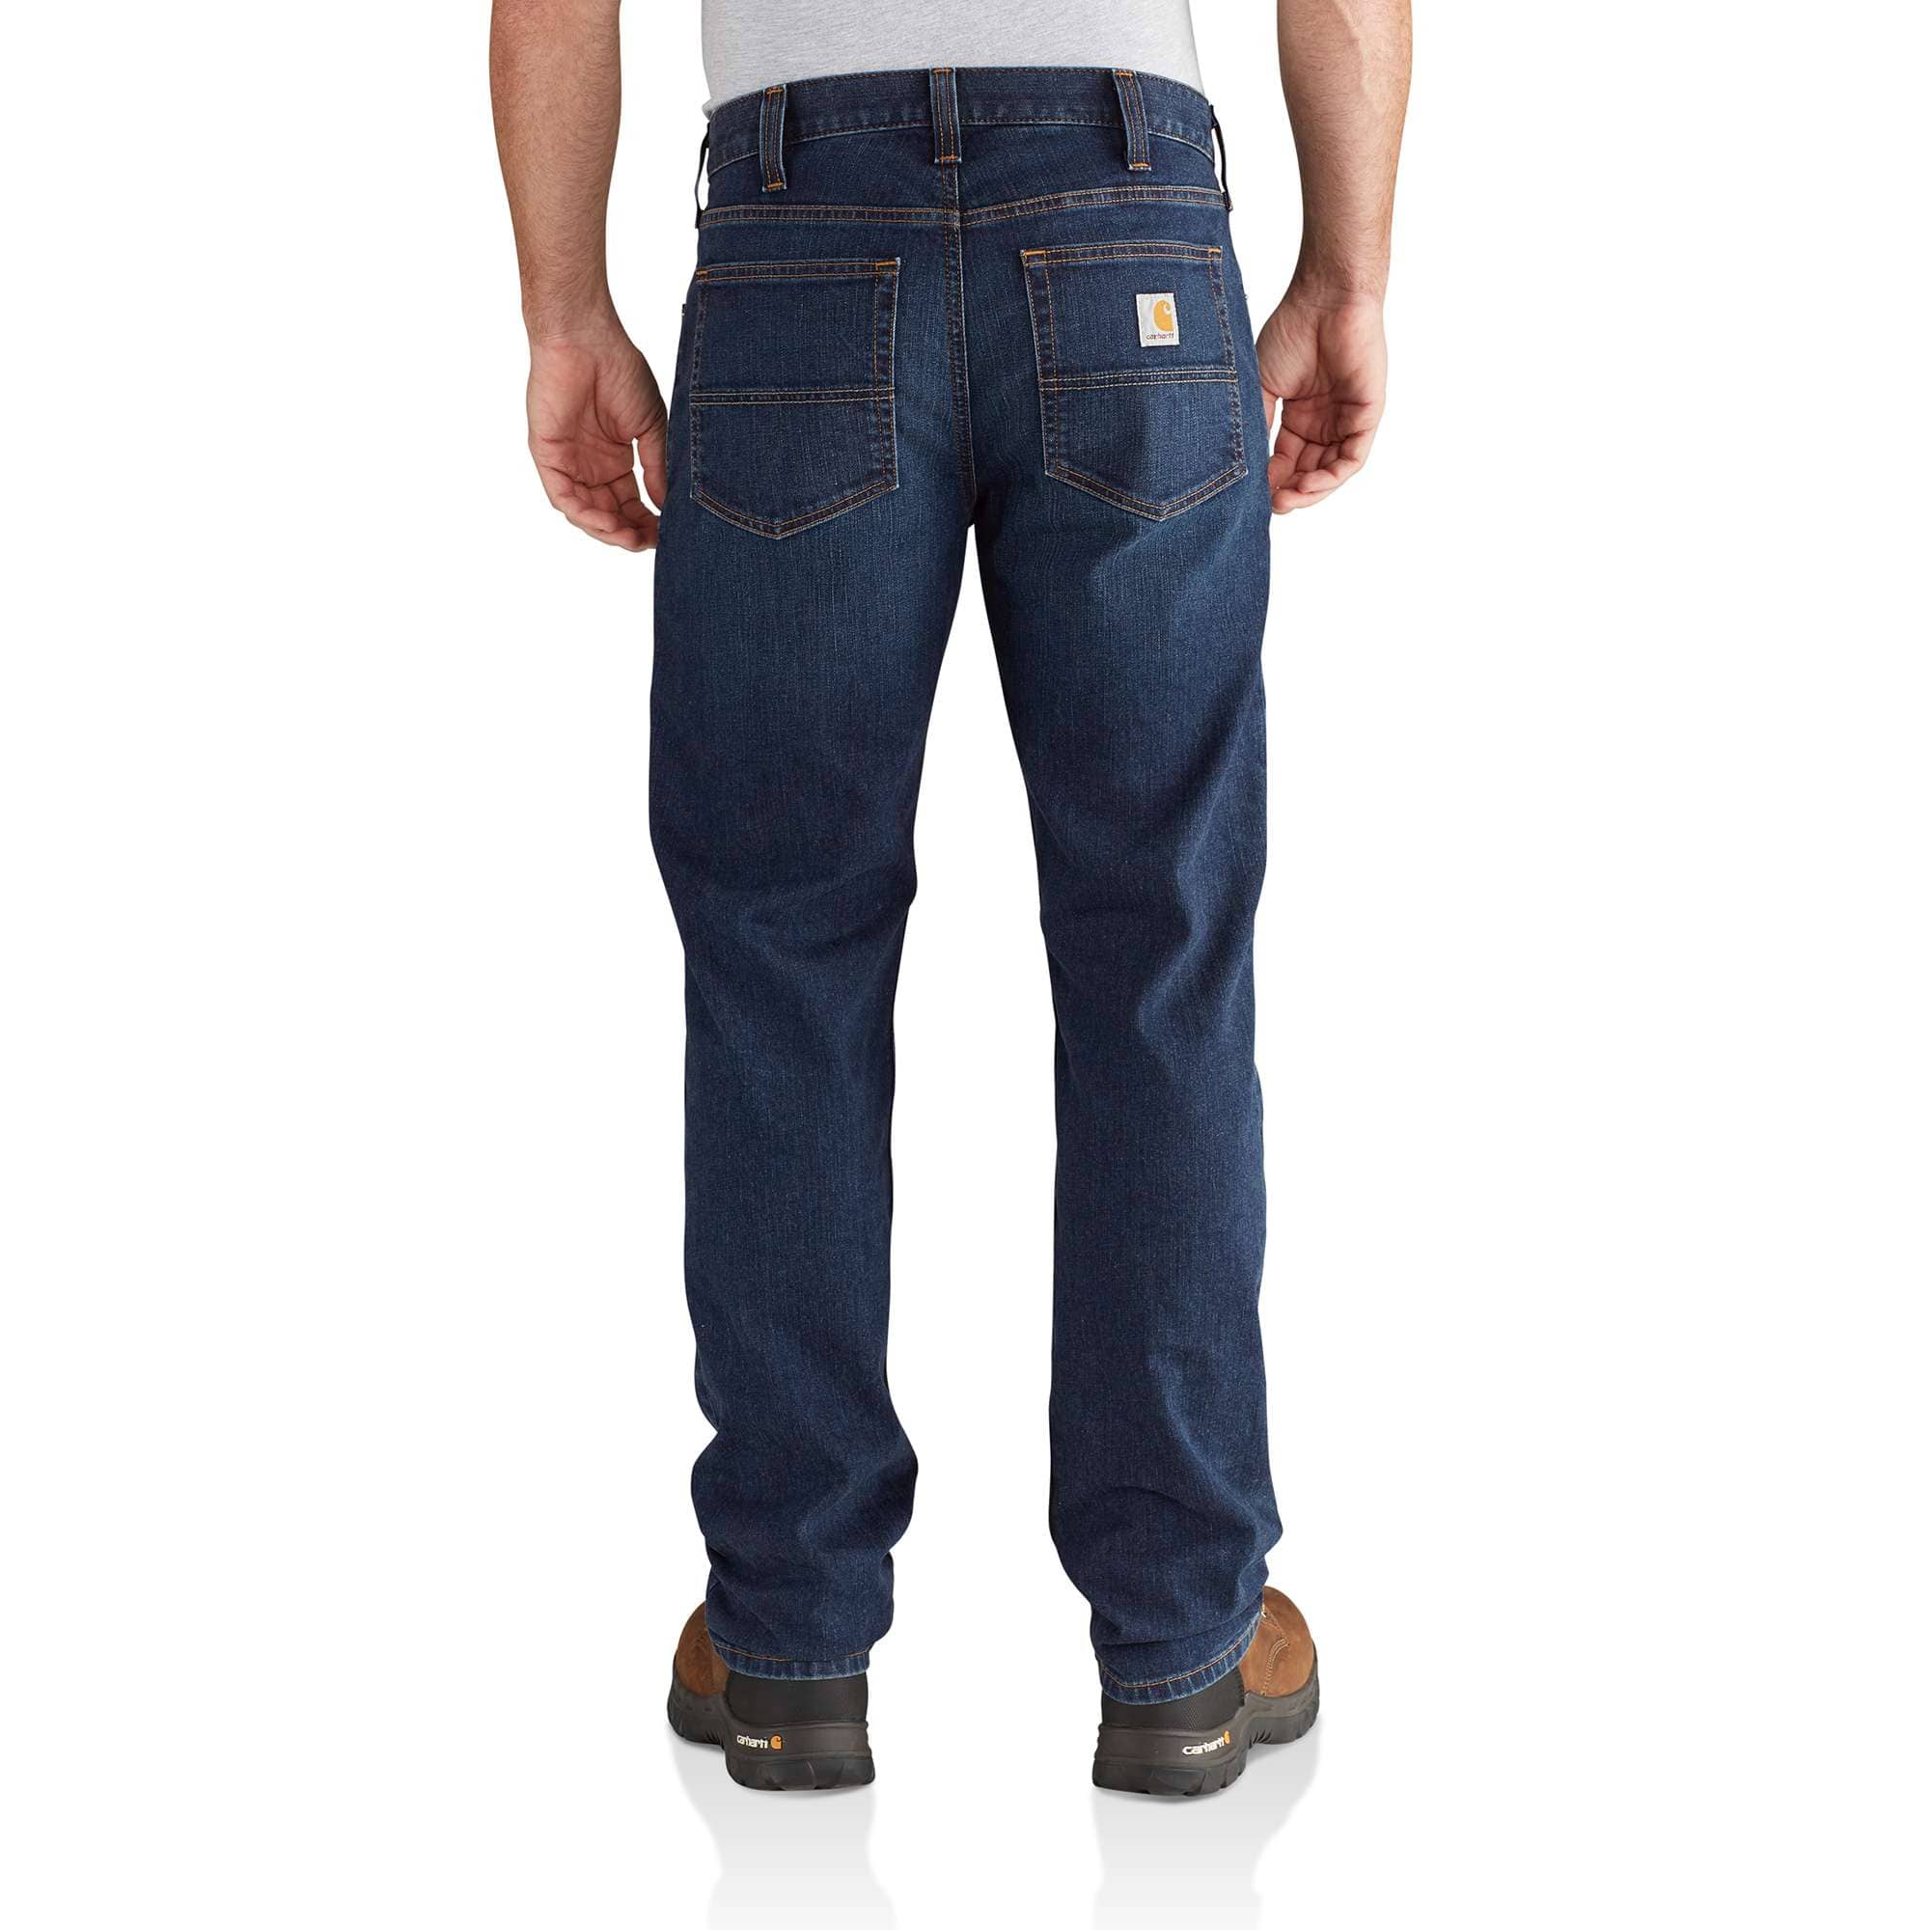 carhartt lined jeans